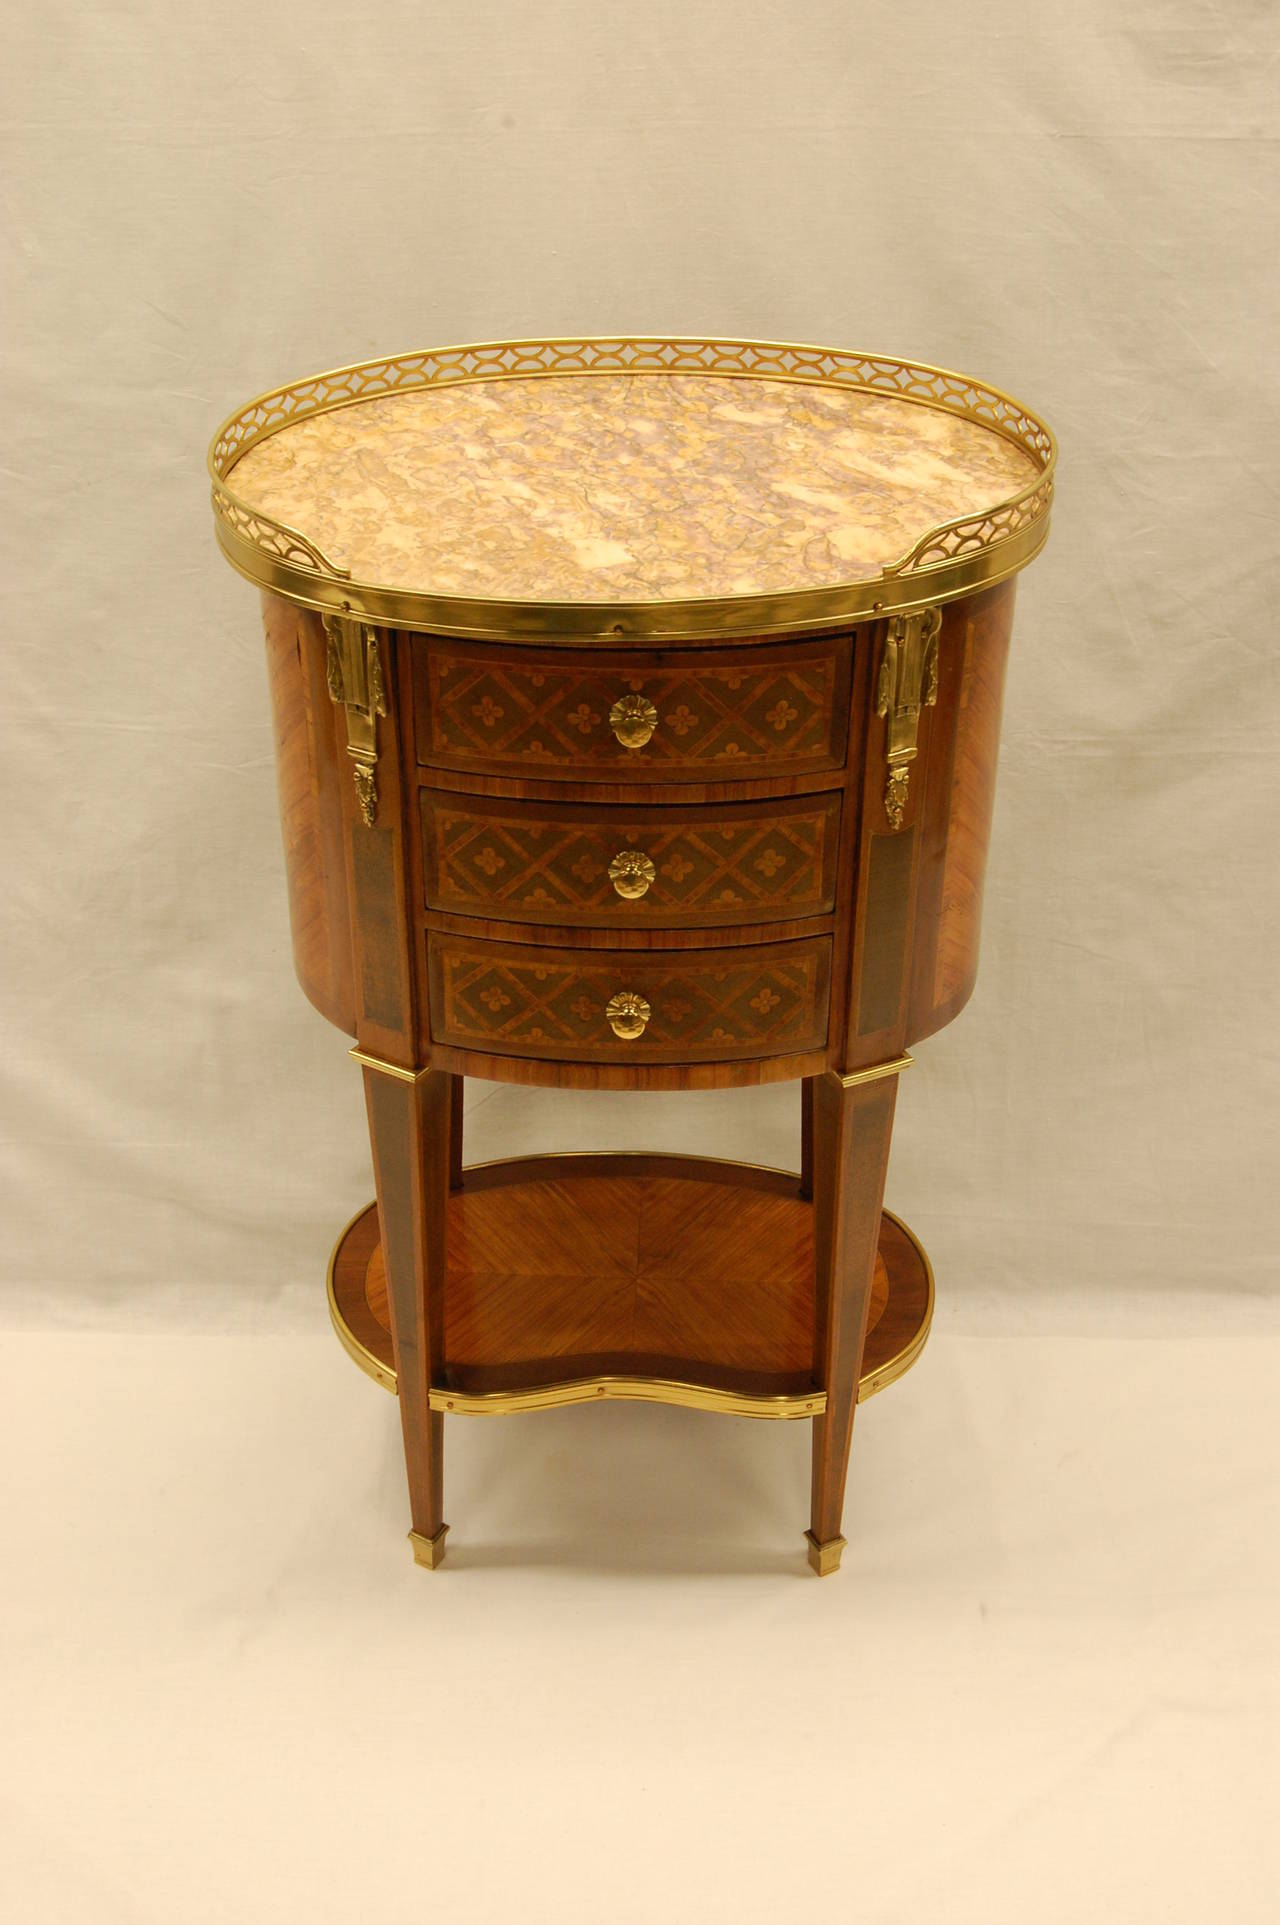 Cast Oval Shaped Sienna Marble-Top French Side Table with Brass Gallery and Ormolu